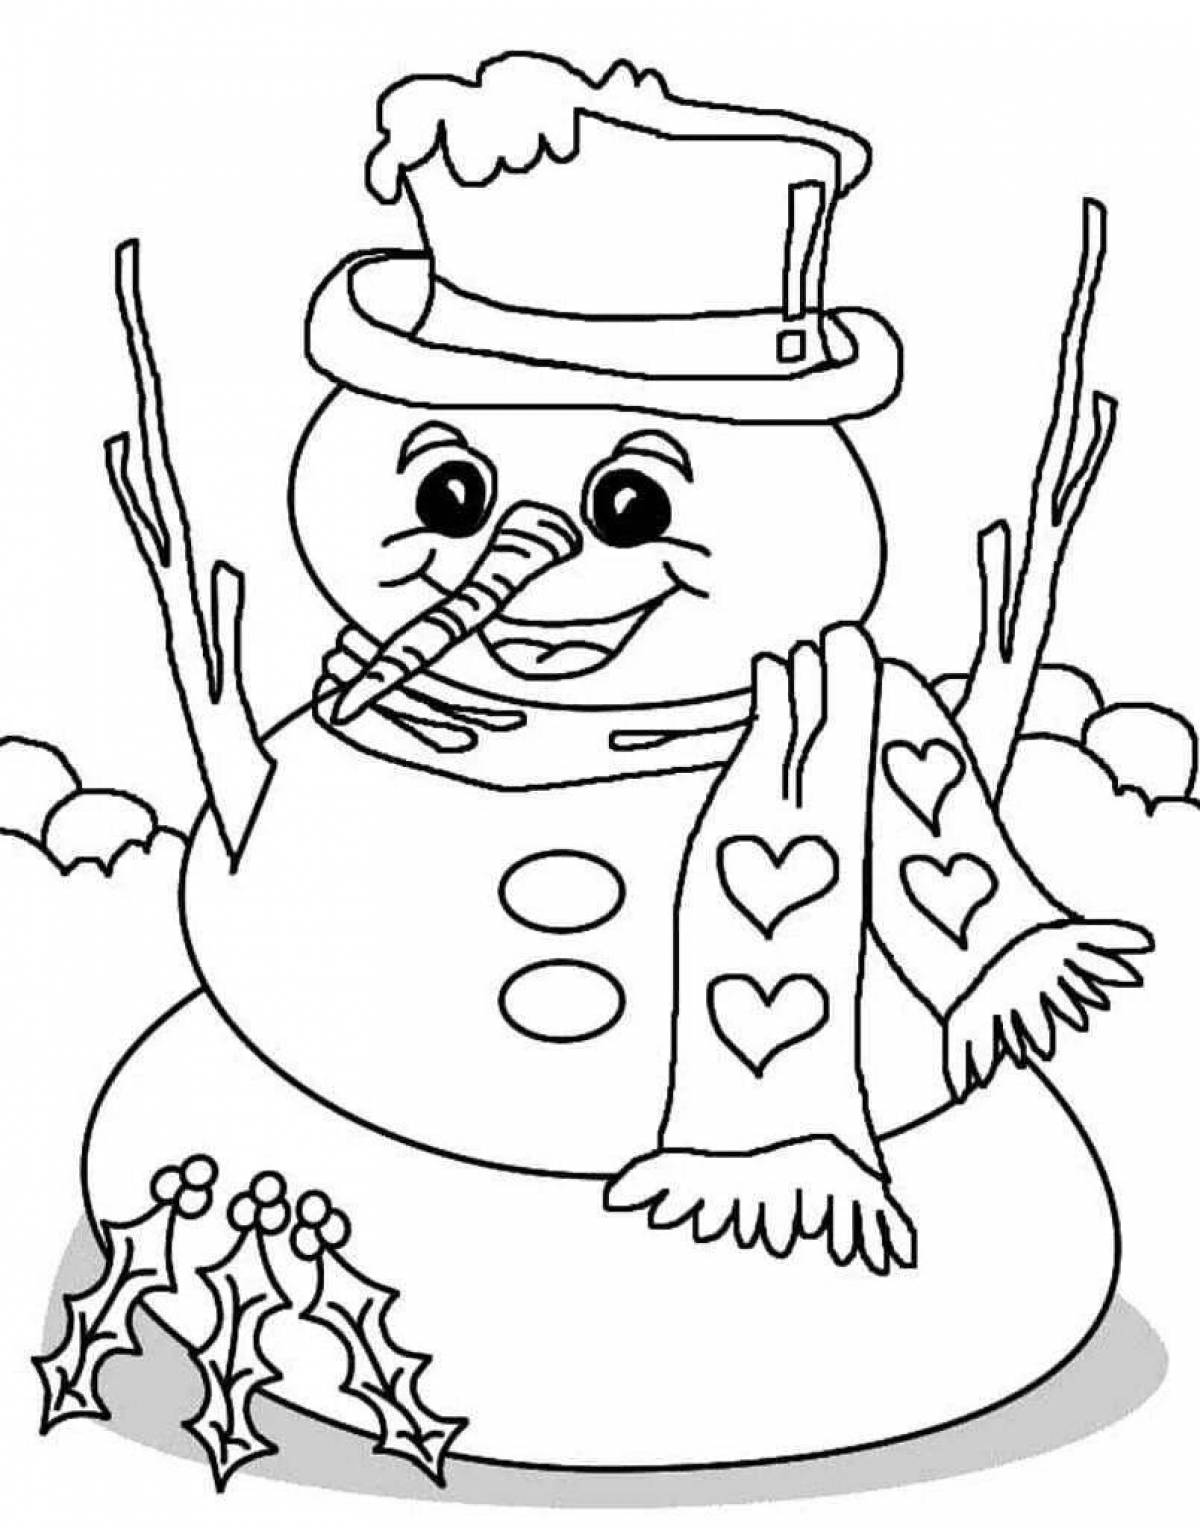 Coloring book glowing children's snowman